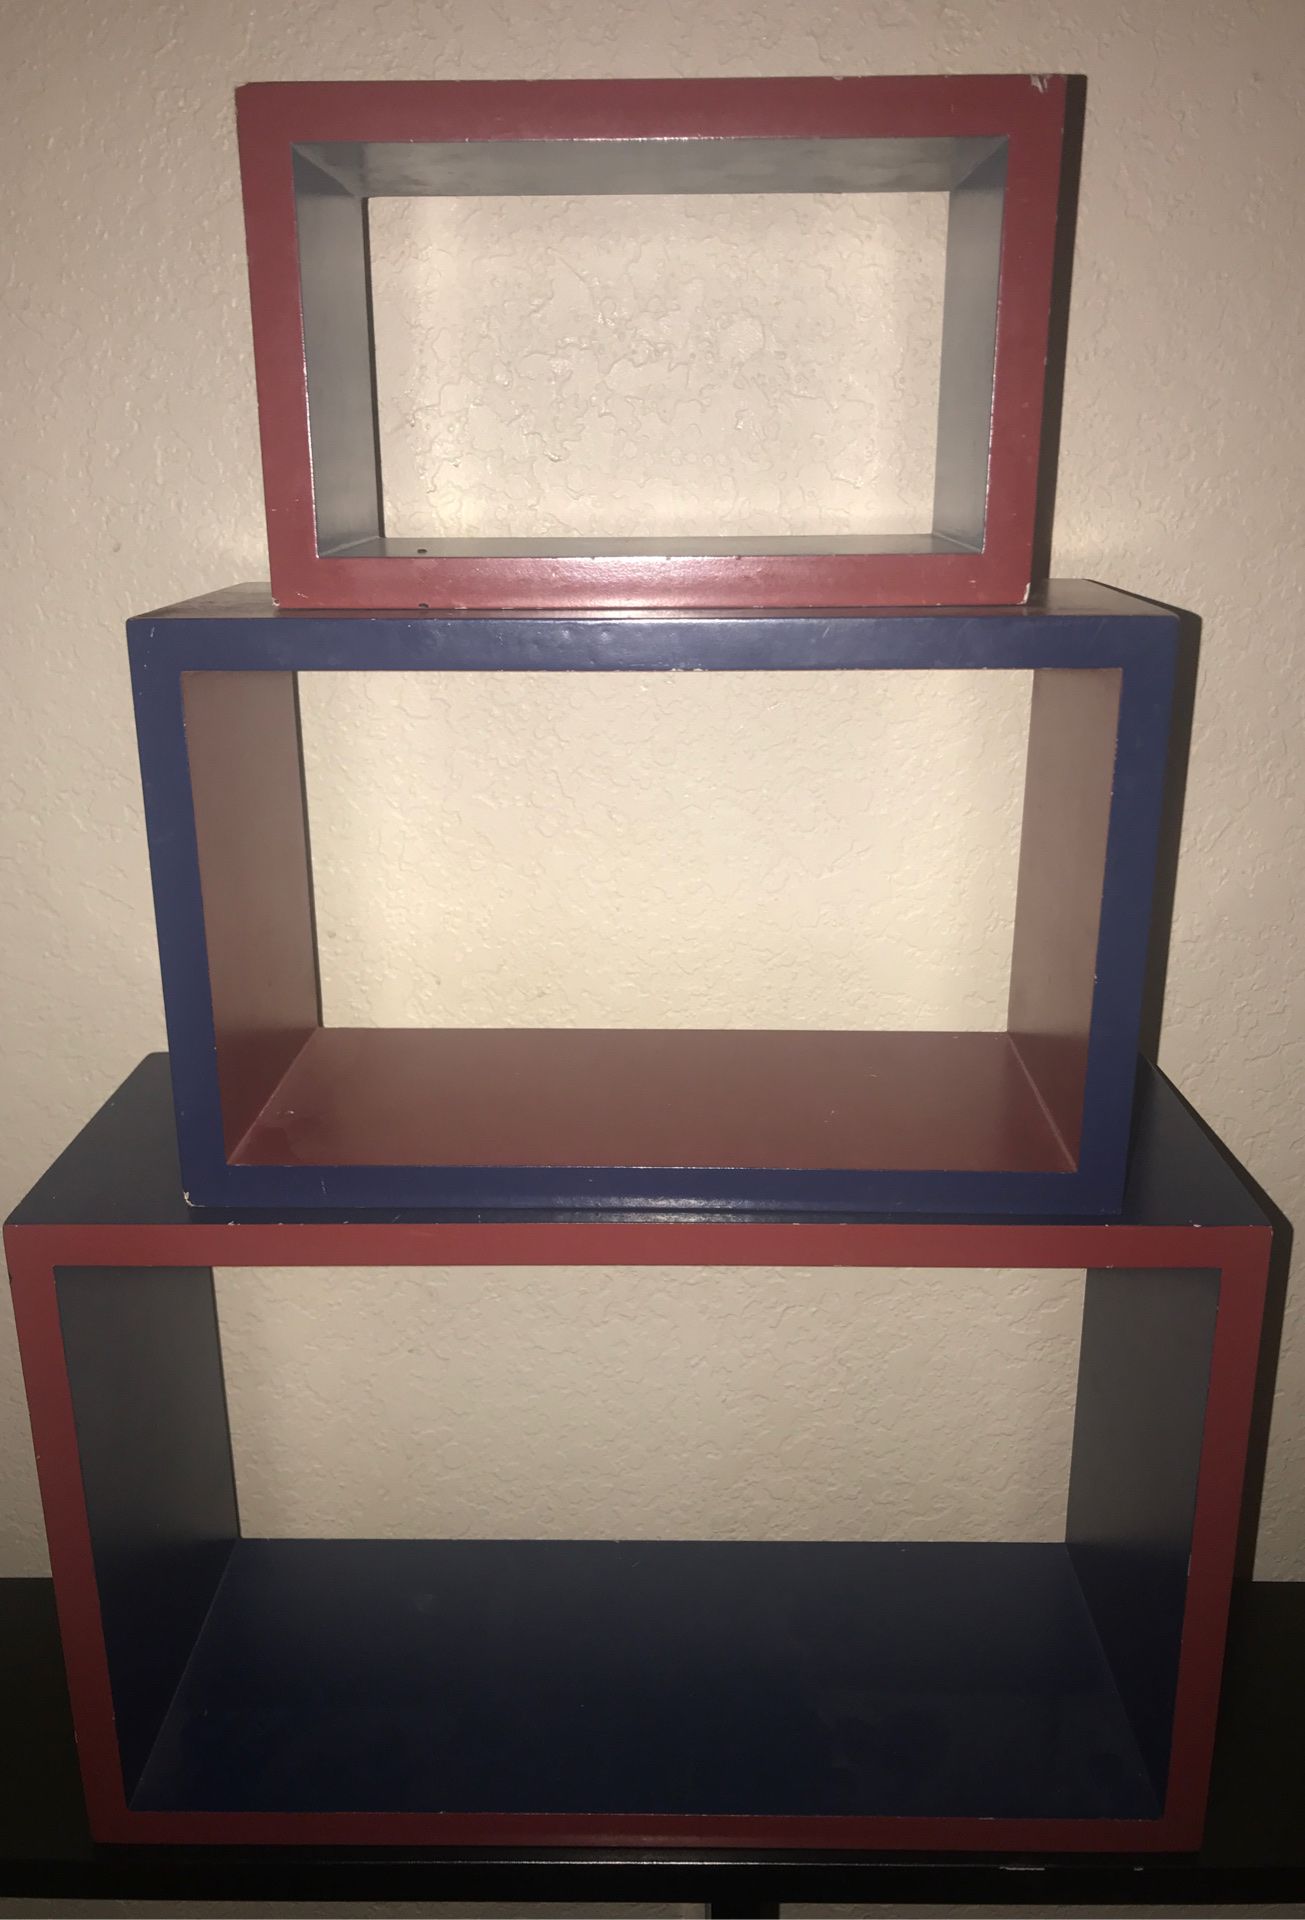 3 WOODEN SHELF PERFECT CONDITION